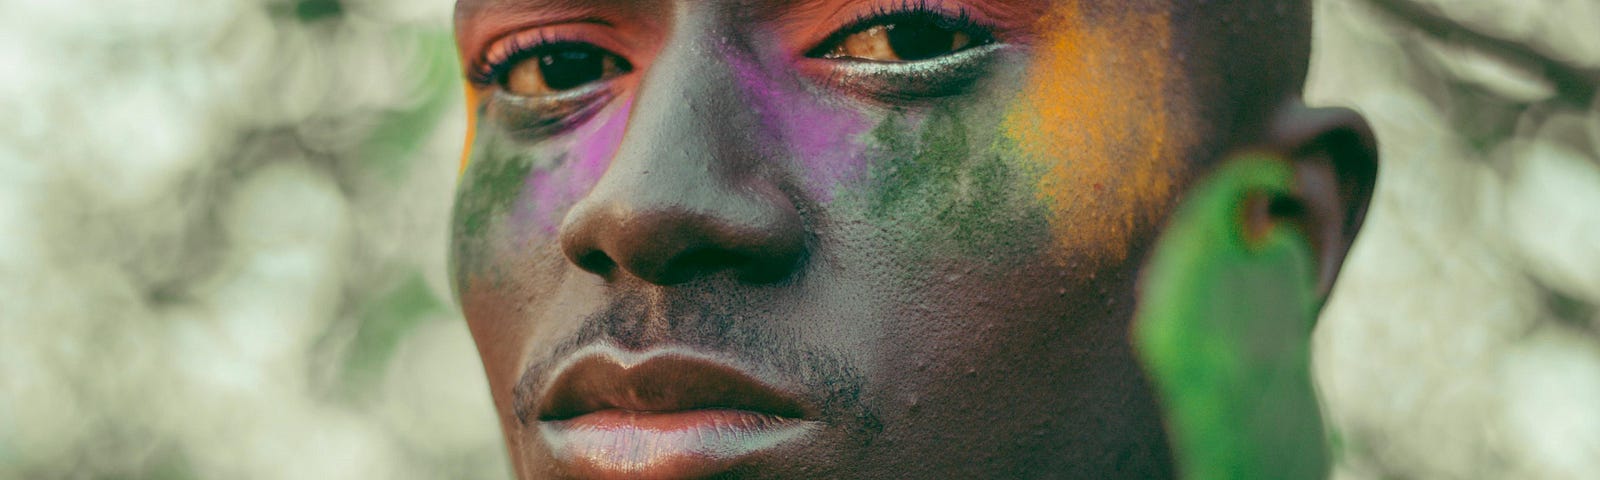 A man of African descent poses outdoors among trees and in-focus leaves. He’s staring at the camera in a close-up, slightly side-on pose to his left. His face is colored with makeup of rainbow hues, and he’s wearing black beads around his bare chest.